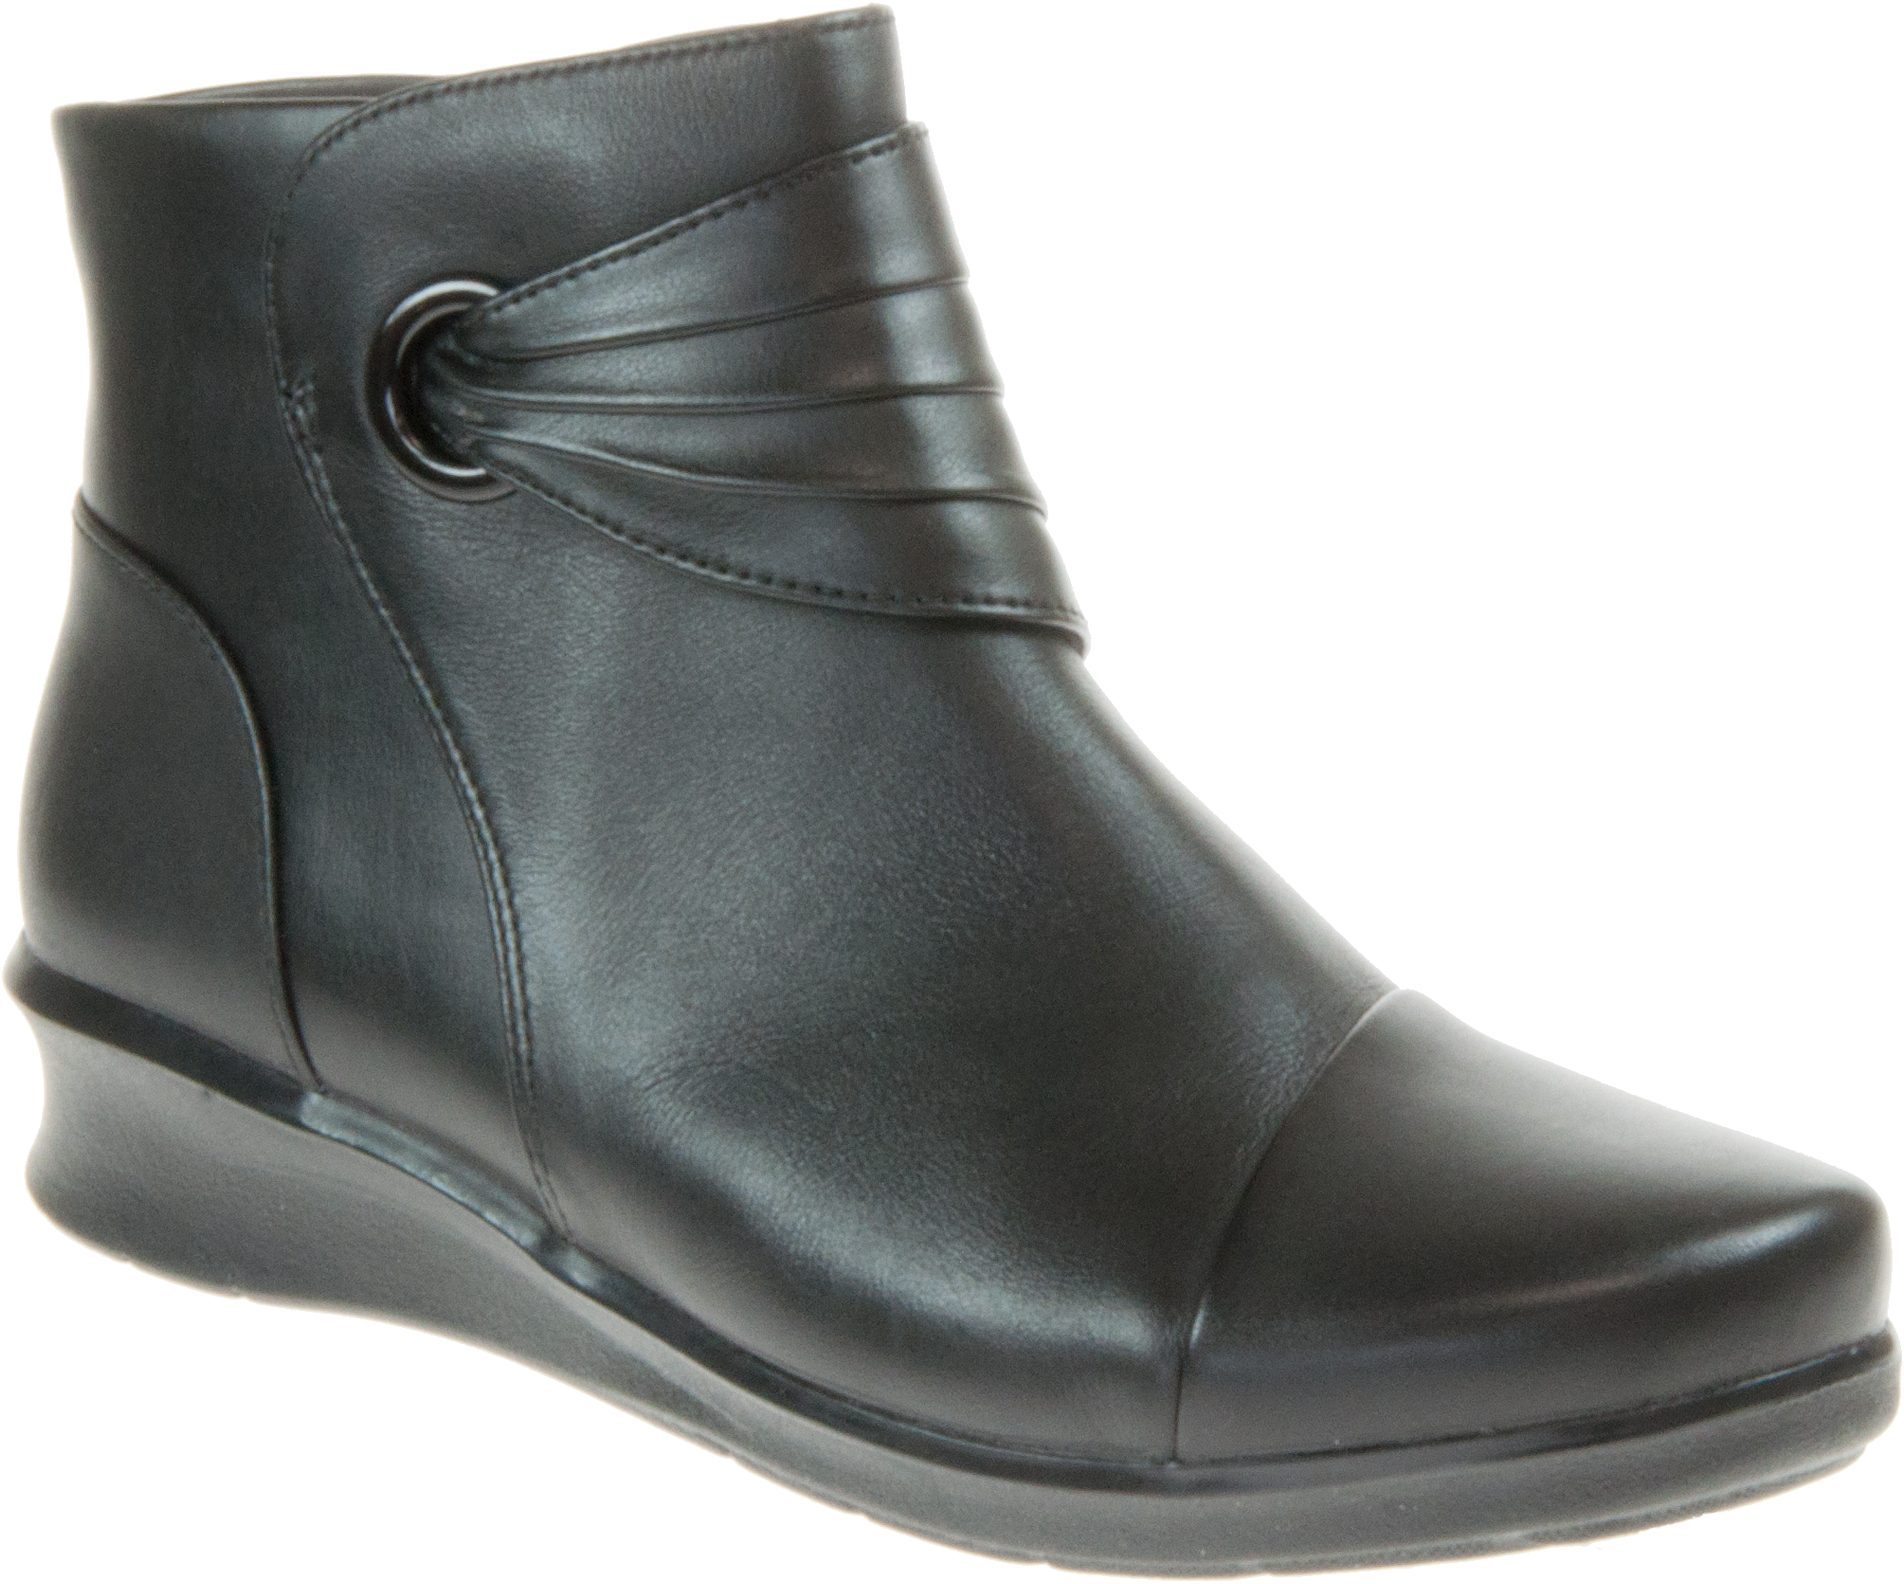 Clarks Hope Twirl Black Leather 26145278 - Ankle Boots - Humphries Shoes